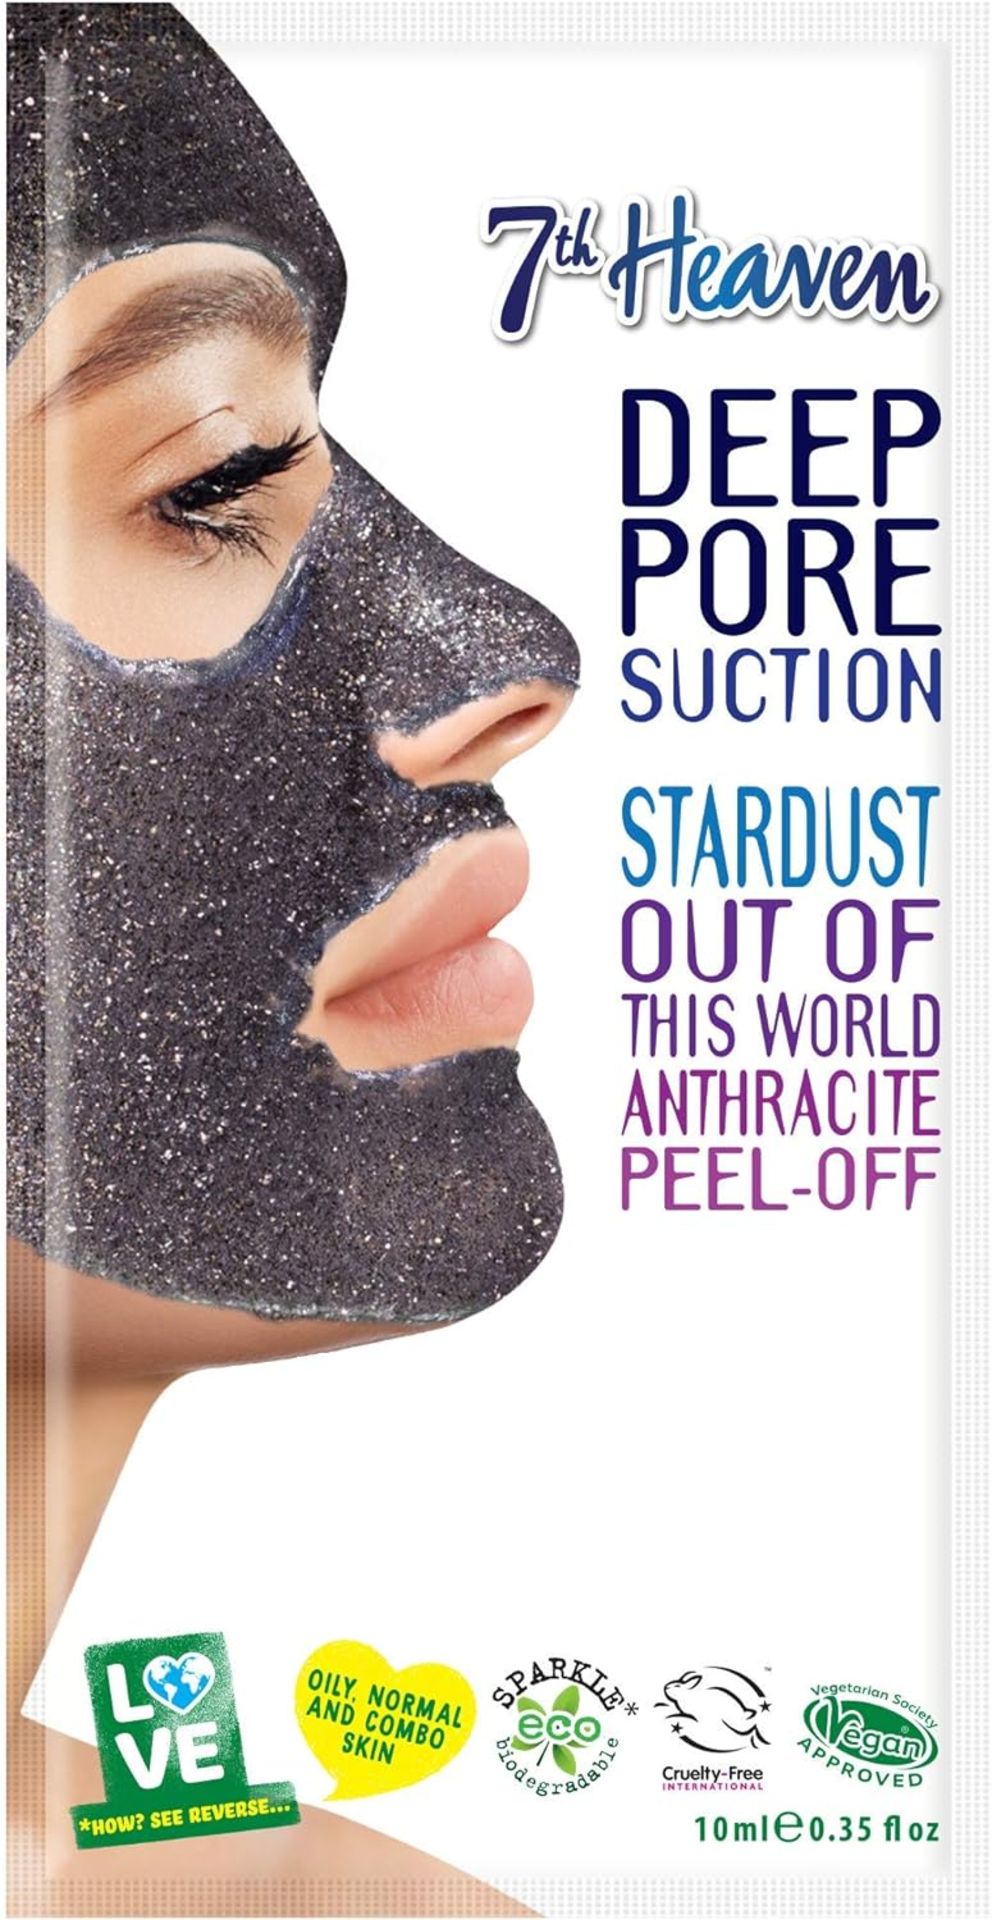 150 X BRAND NEW DEEP PORE SUCTION STARDUST OUT OF THIS WORLD ANTHRACITE PEEL OFF MASKS EBR7